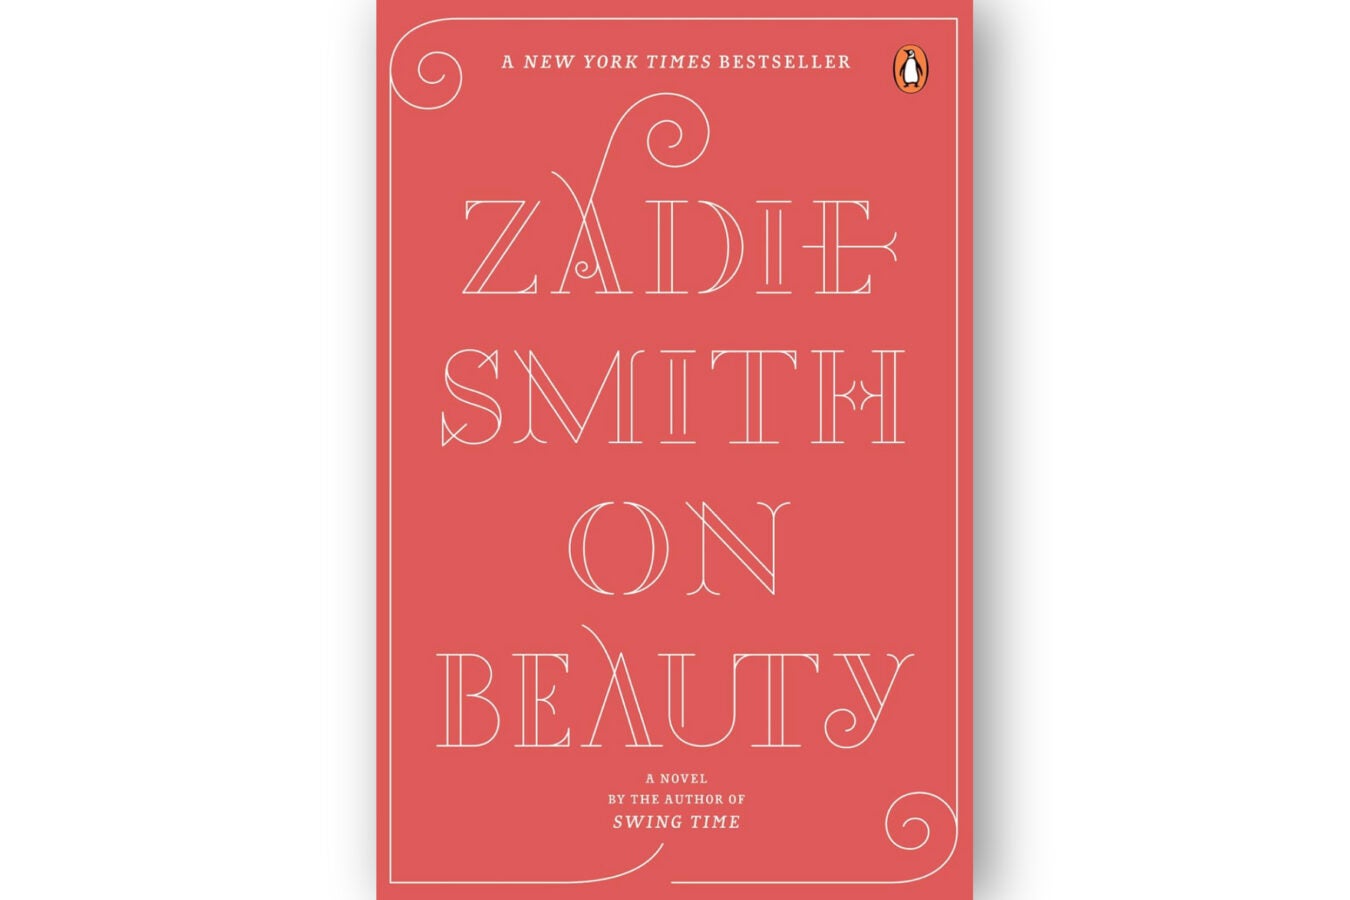 Book cover: "On Beauty" by Zadie Smith.